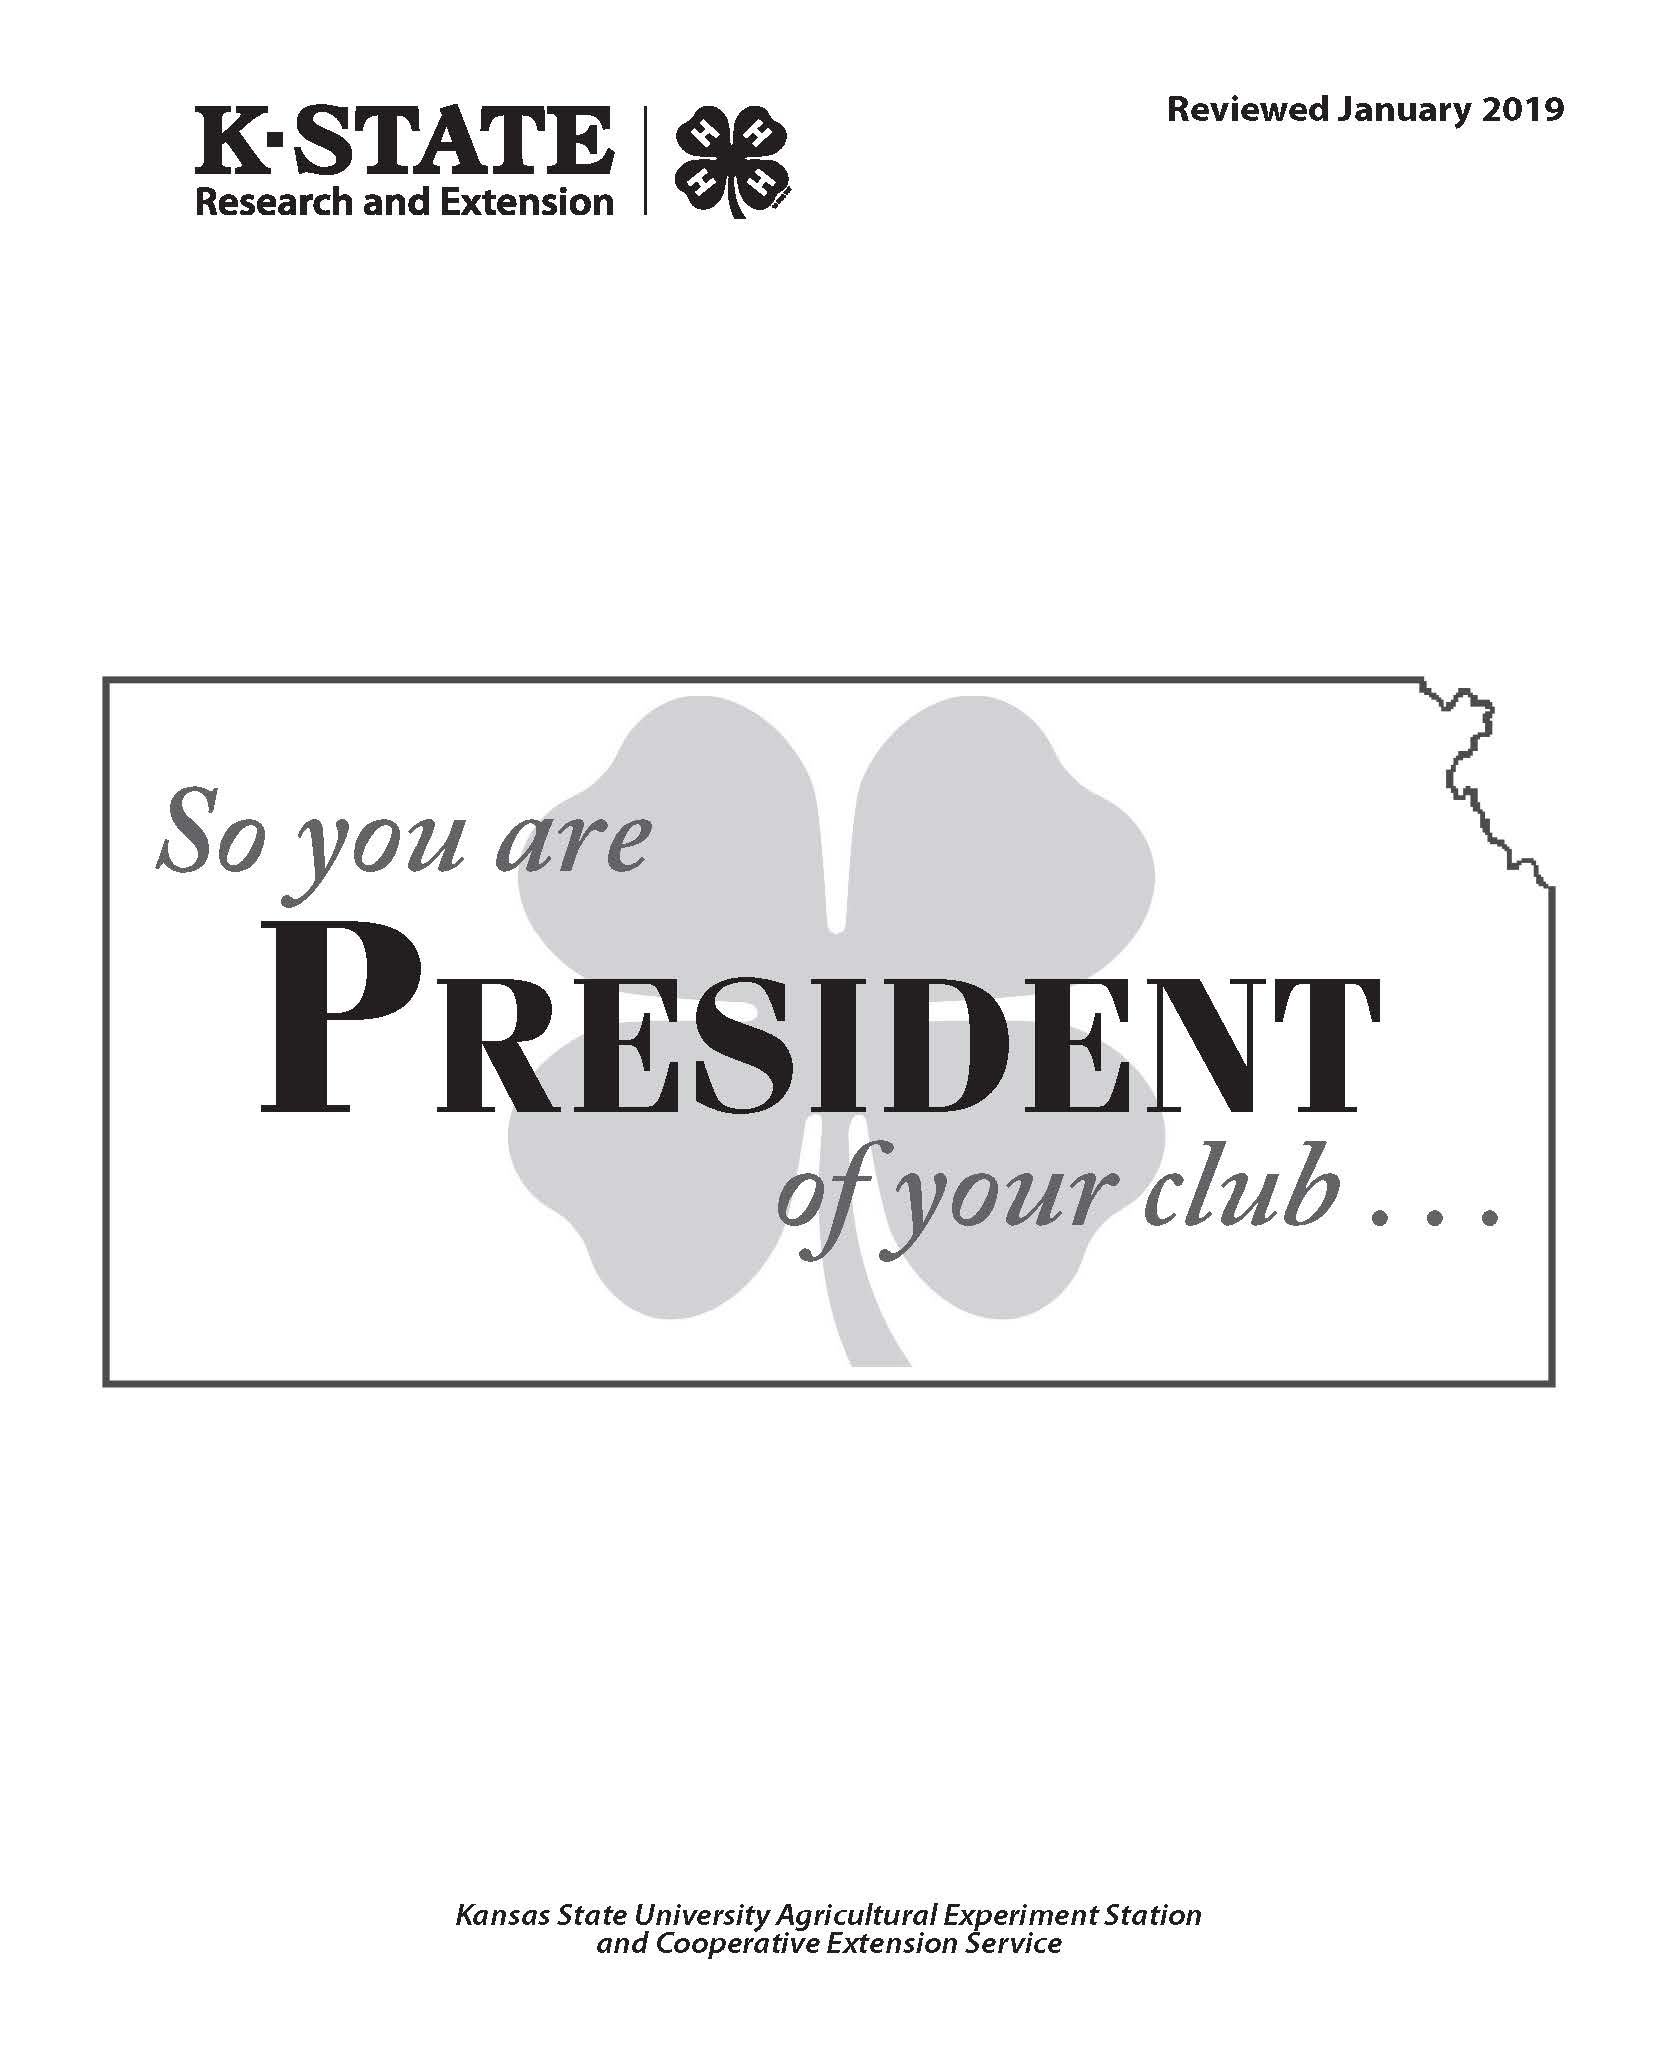 So you are President of your club